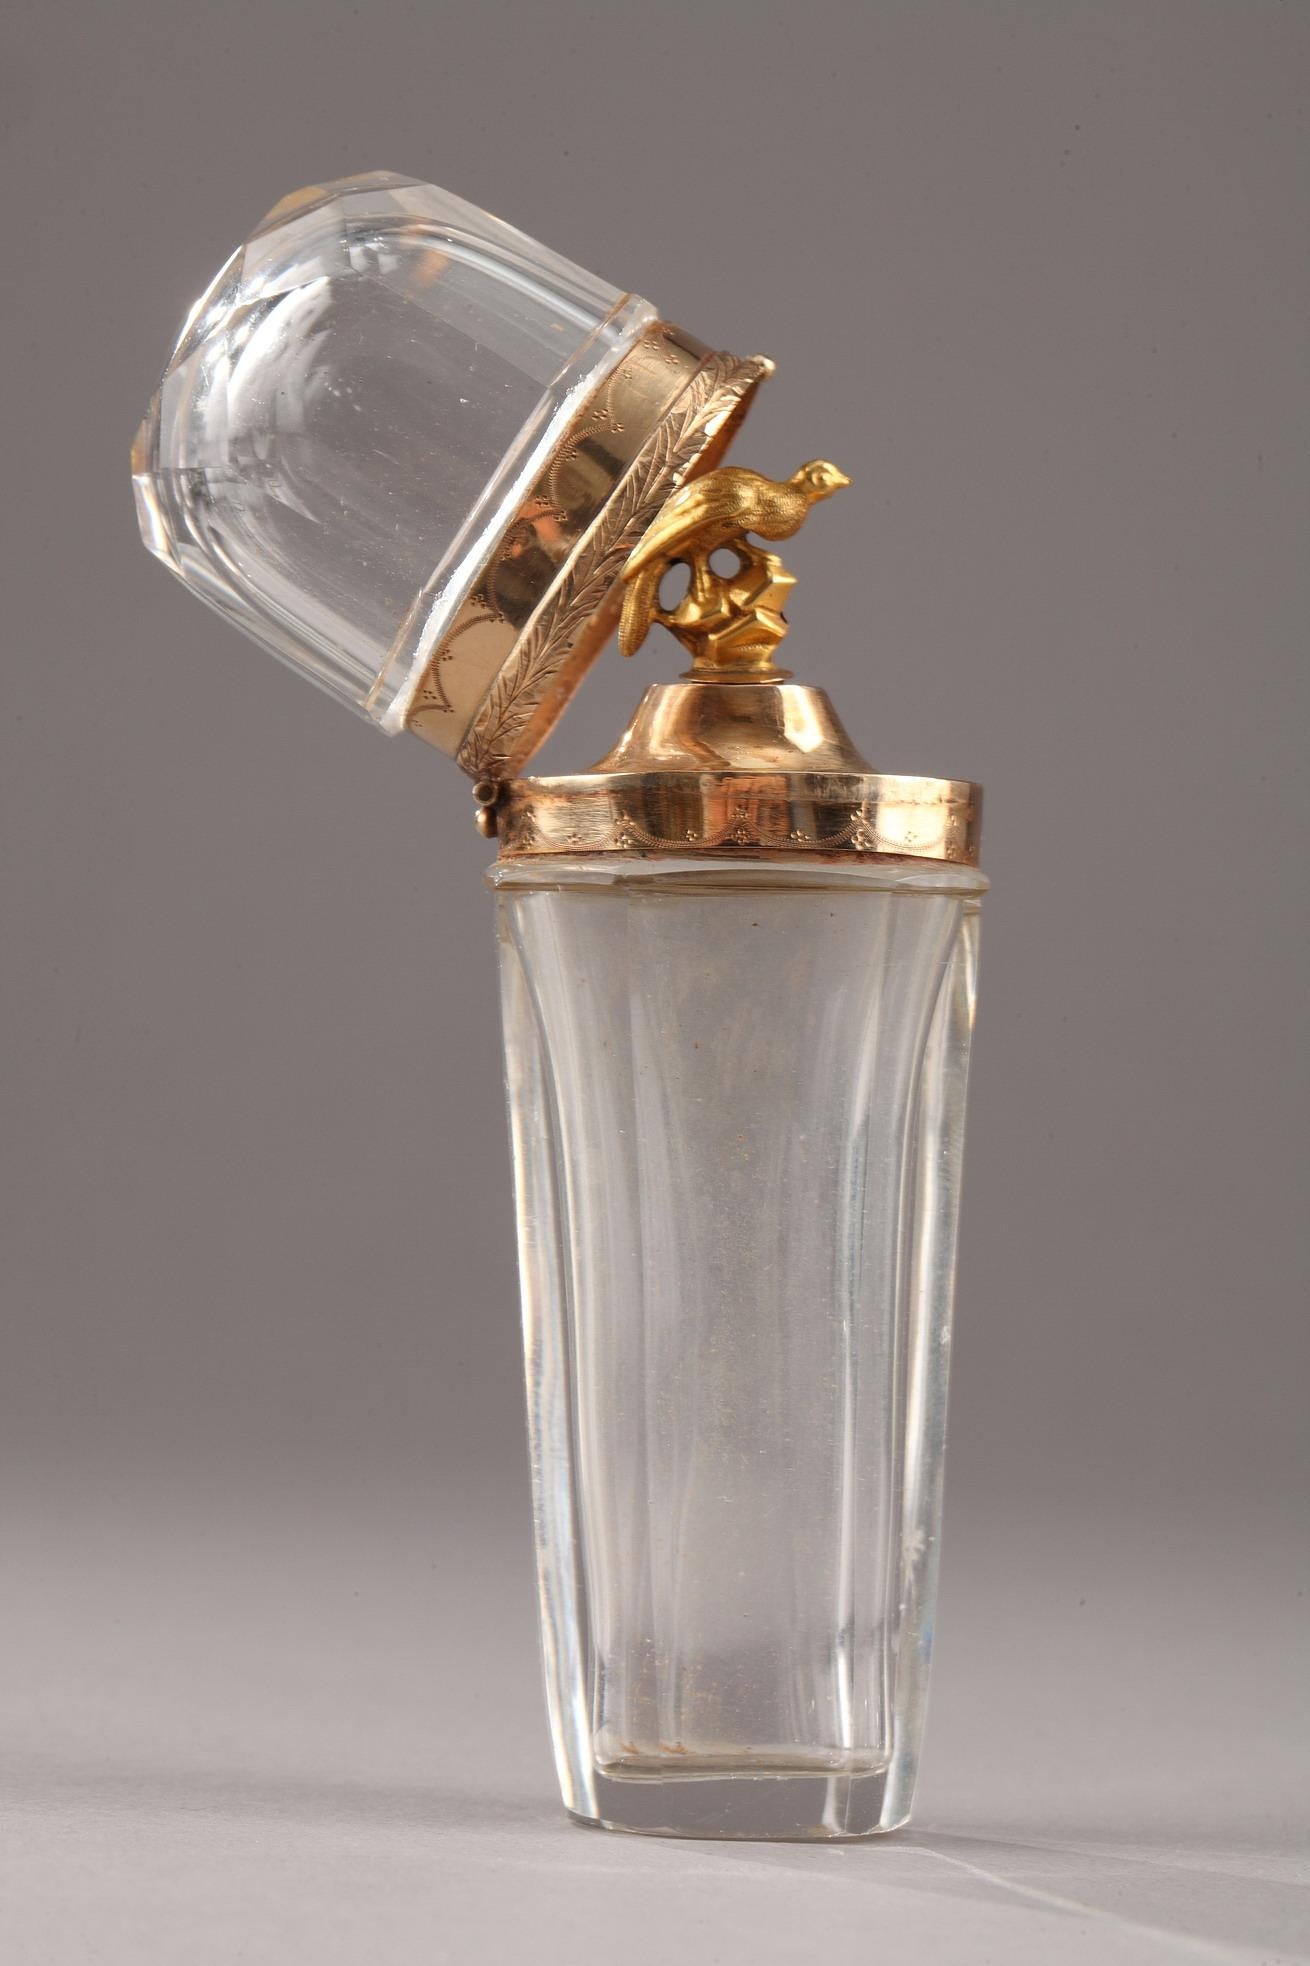 Conical shaped bottle in faceted crystal and gold setting. The conical bottle set in a gold mount opens with a hinge. Inside, the cap has a gripping shaped bird. Once the cap is closed, it forms a 